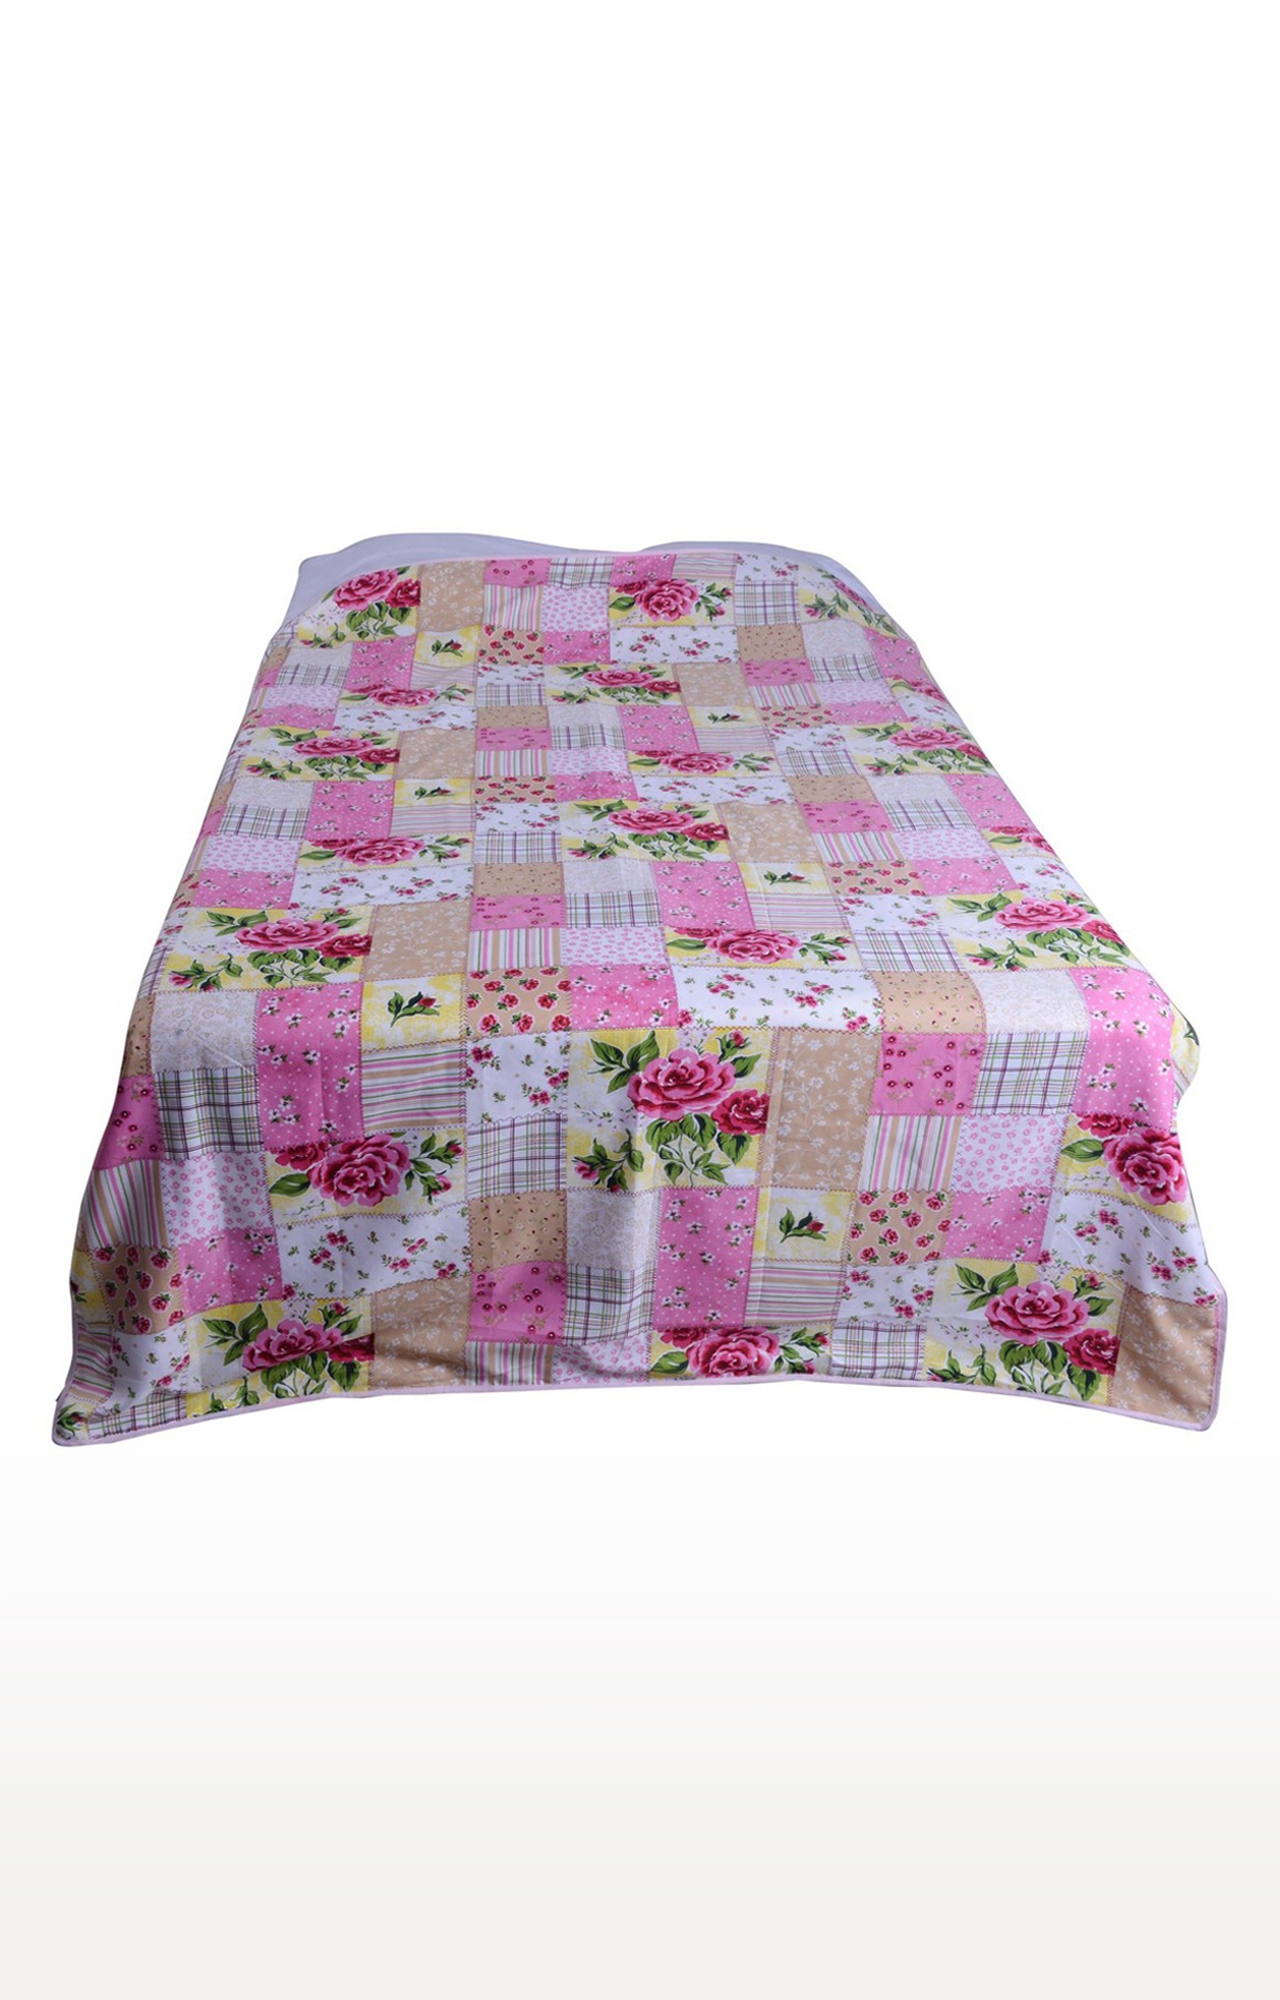 Red Checks & Flower Printed Cotton 3 Layer Single Bed Quilt Dohar